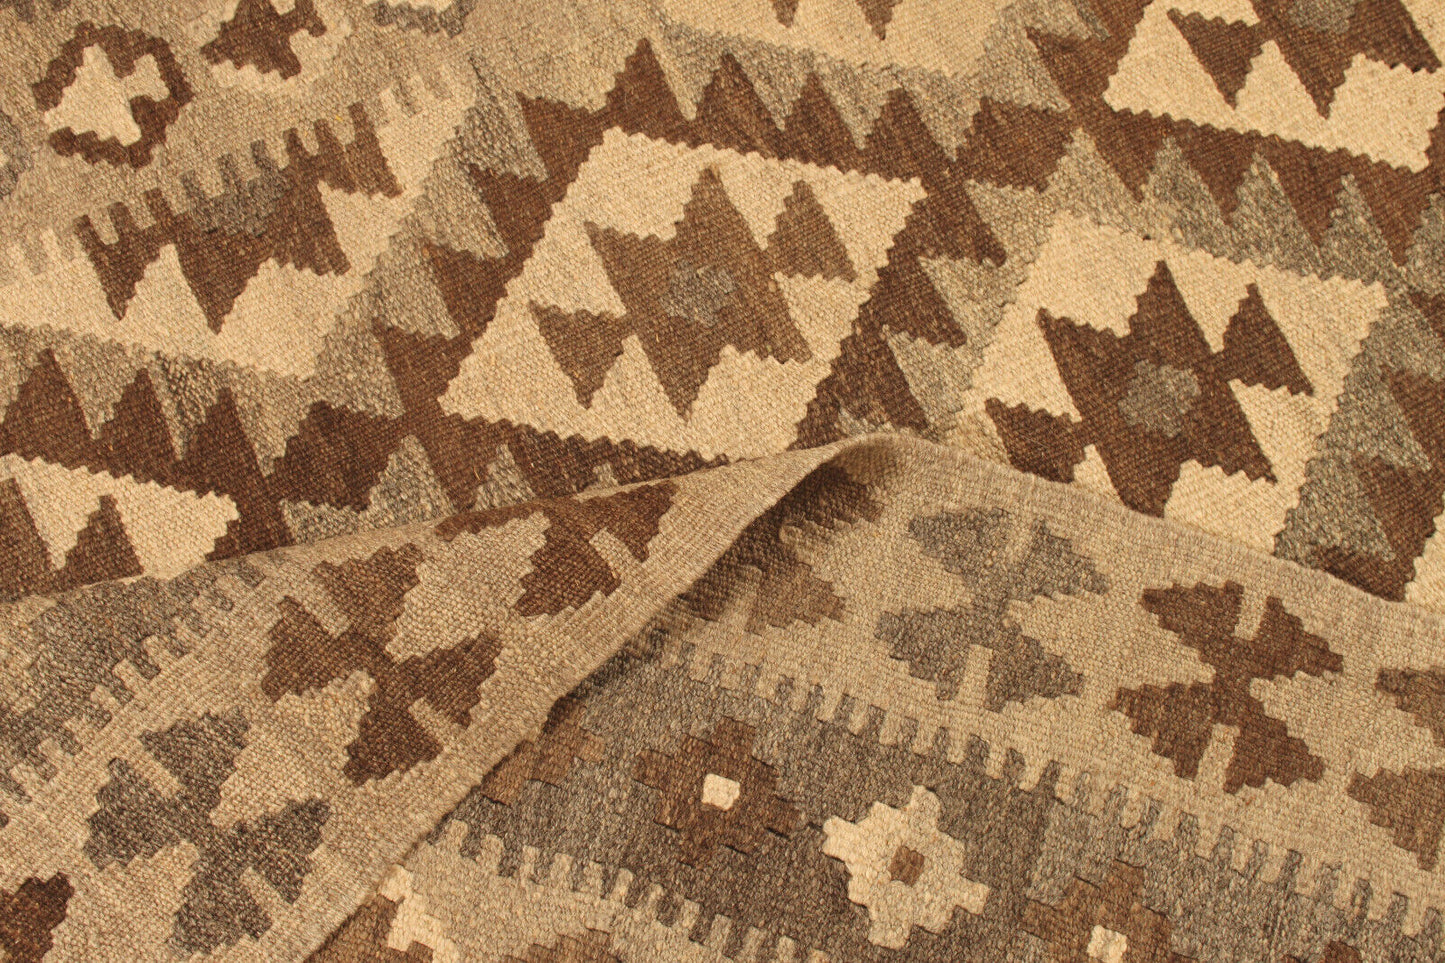 Close-up of the beige and brown shades on the Handmade Vintage Afghan Flatweave Kilim